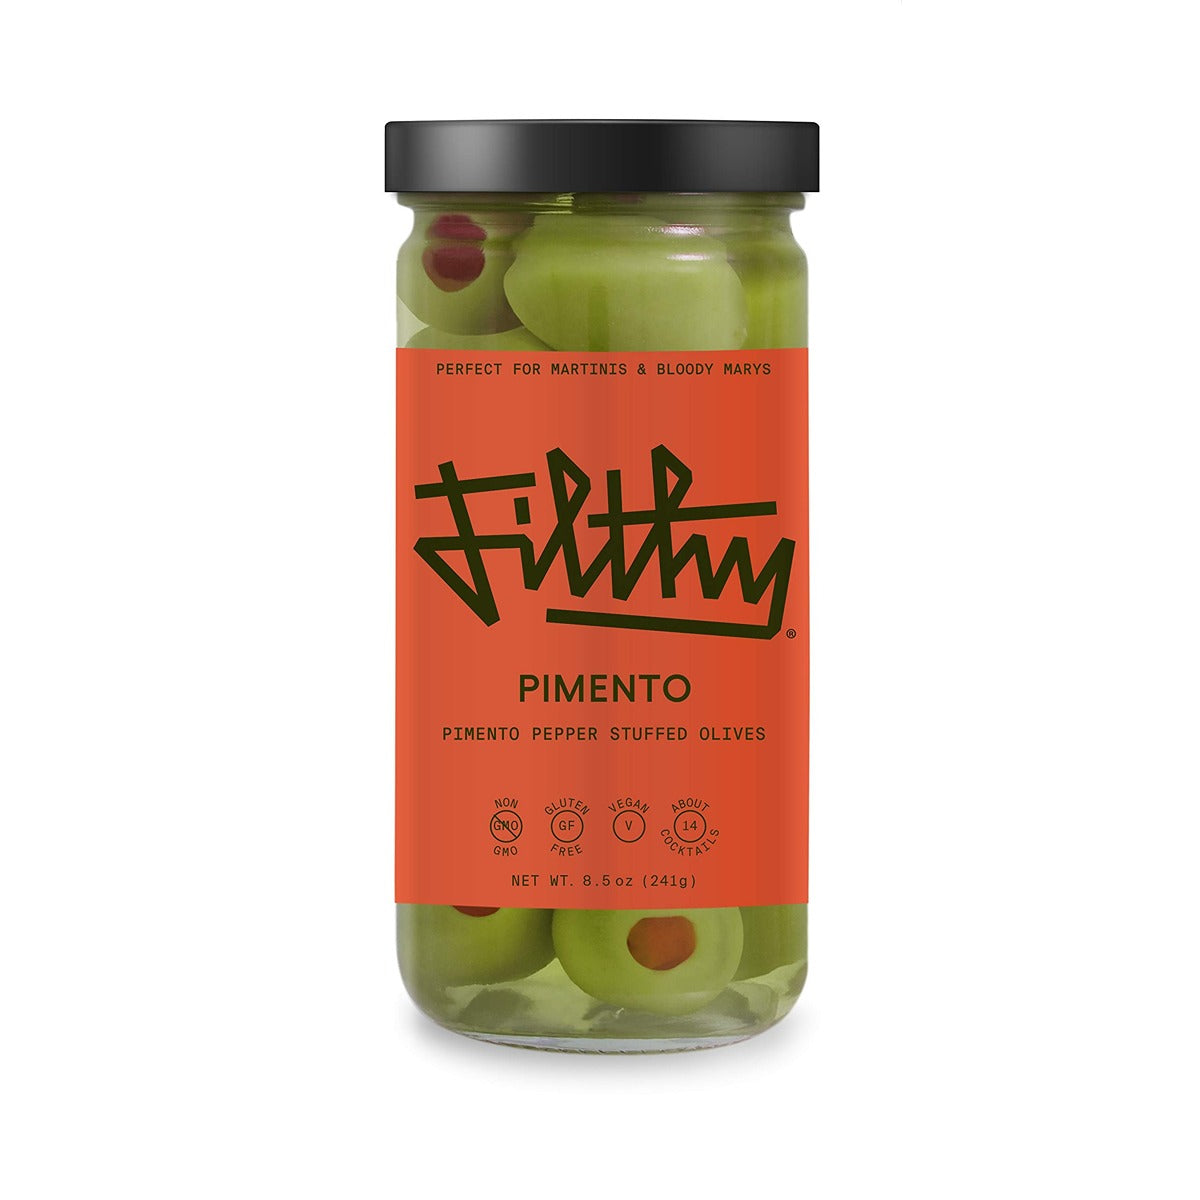 FILTHY PIMENTO OLIVES